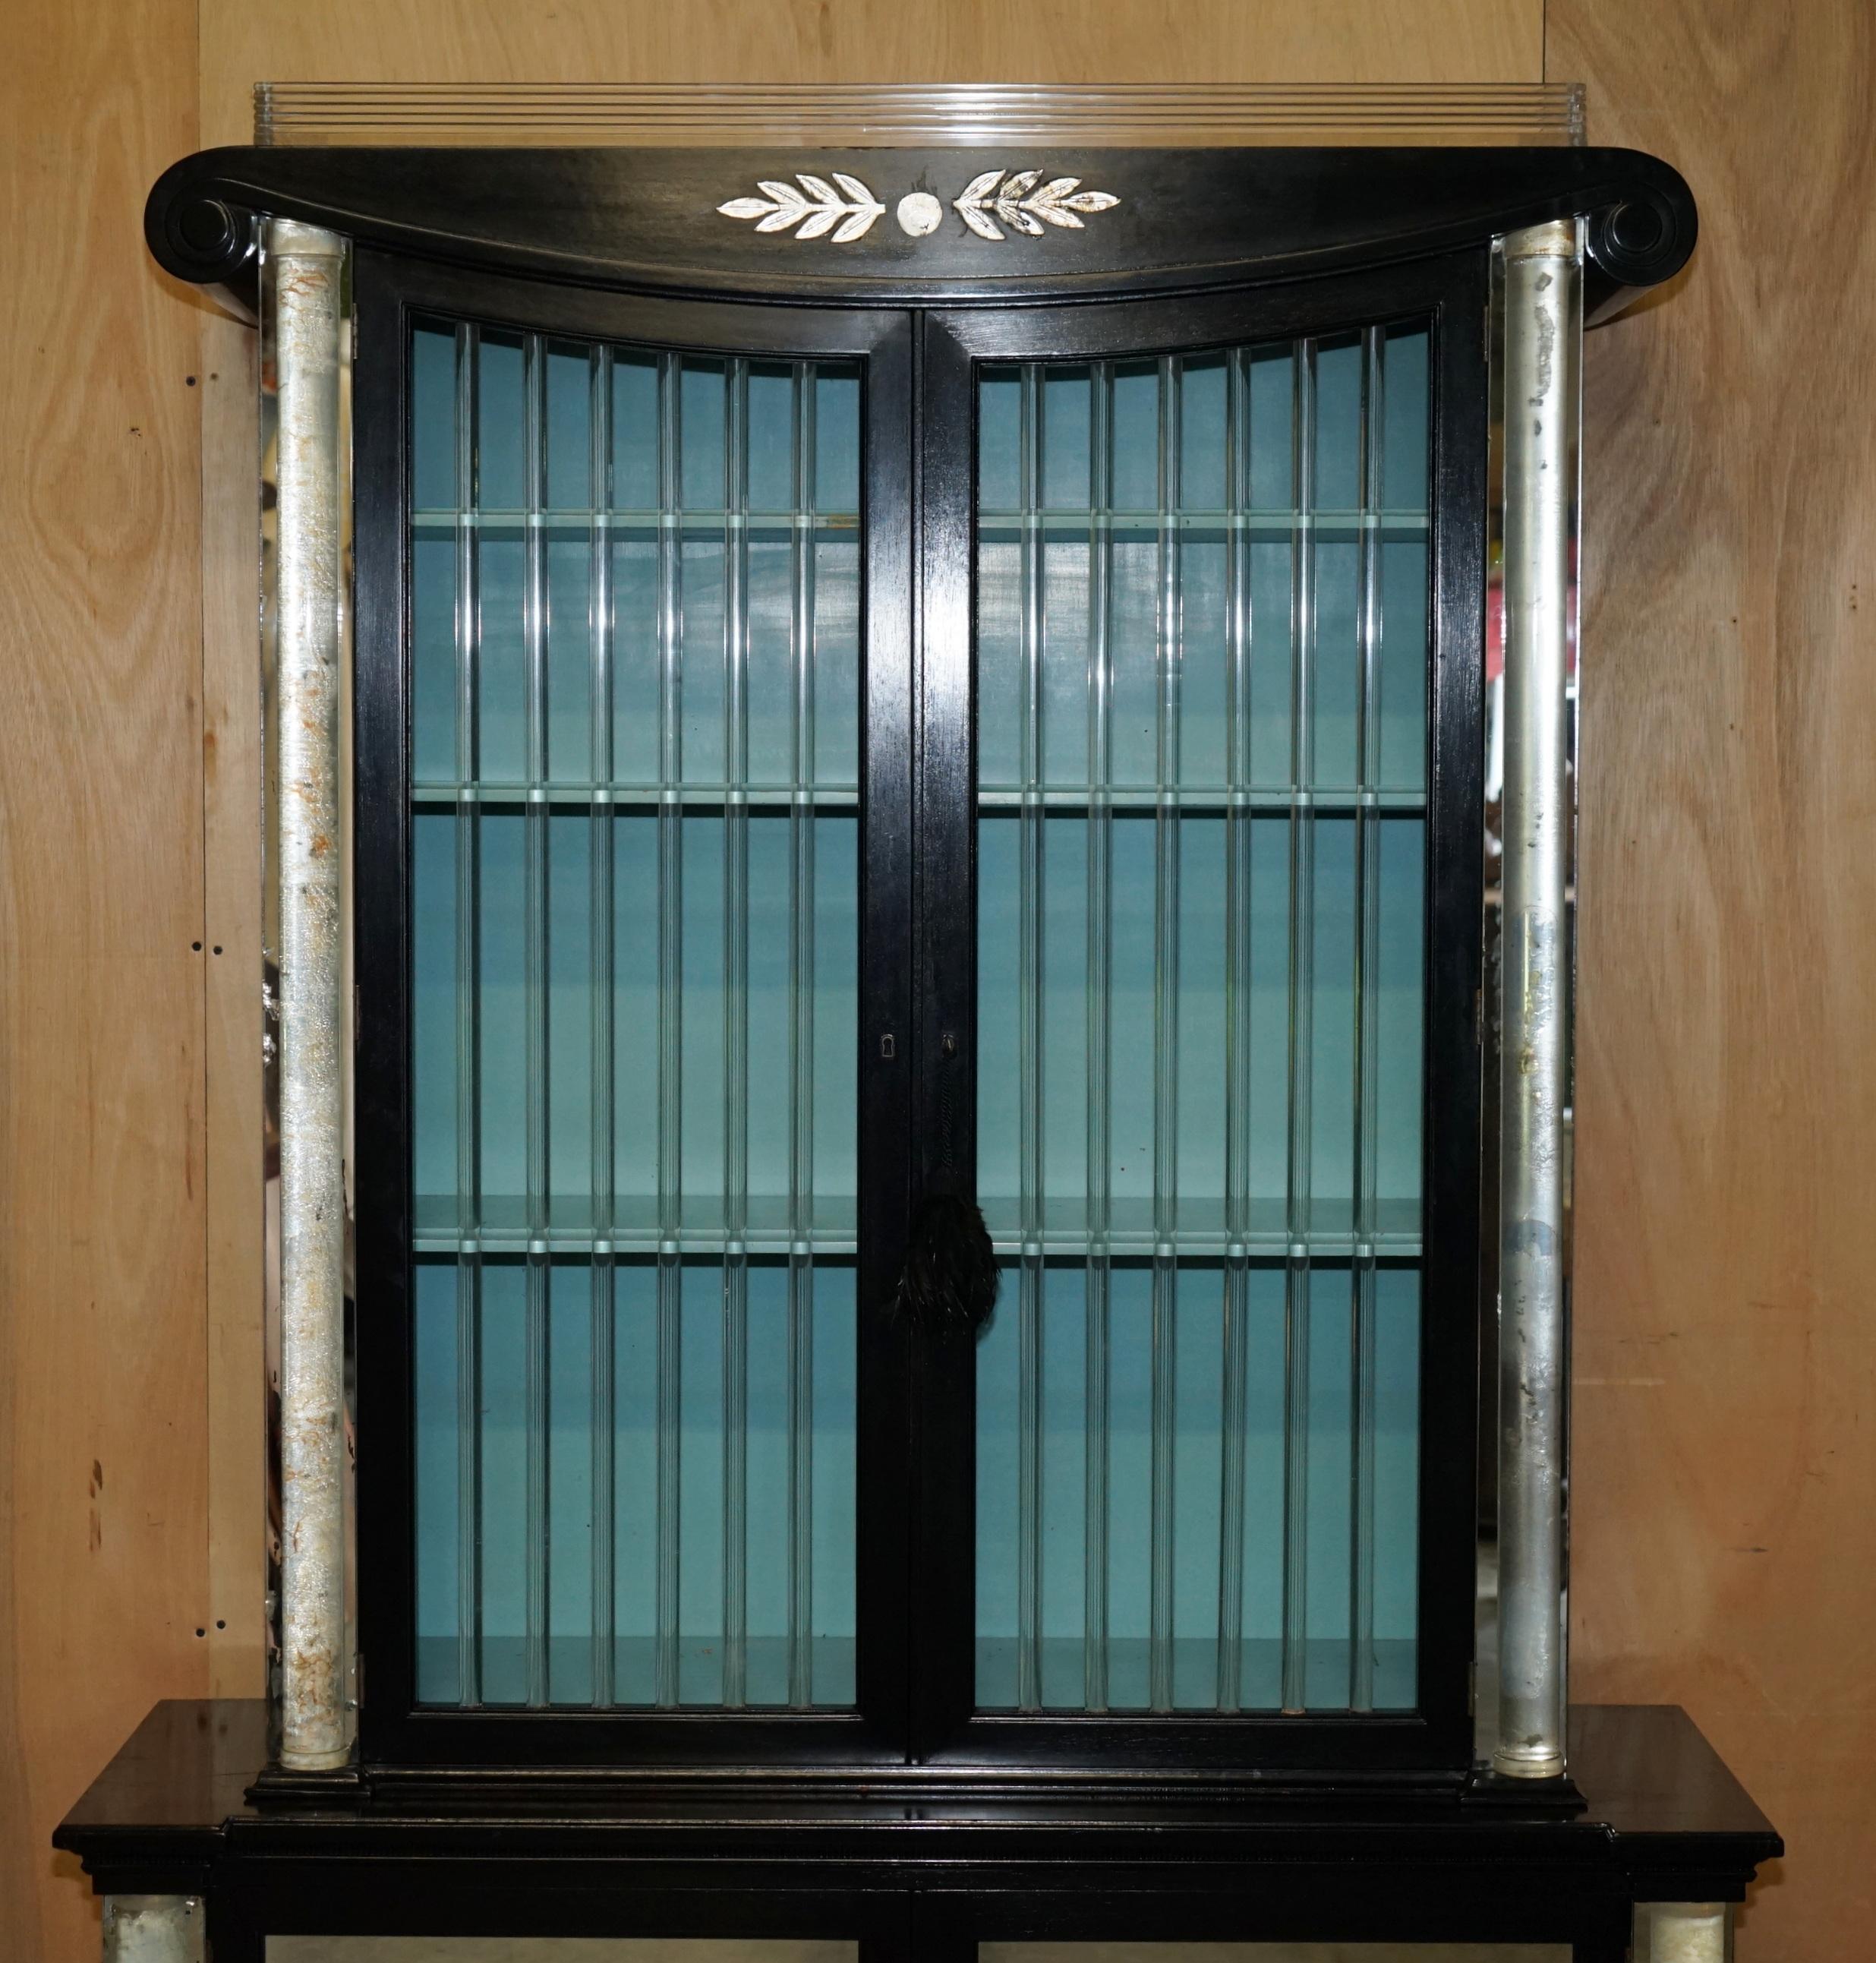 ORIGINAL ART DECO BOOKCASE CABiNET MADE BY LORIN JACKSON FOR GROSFELD HOUSE For Sale 3